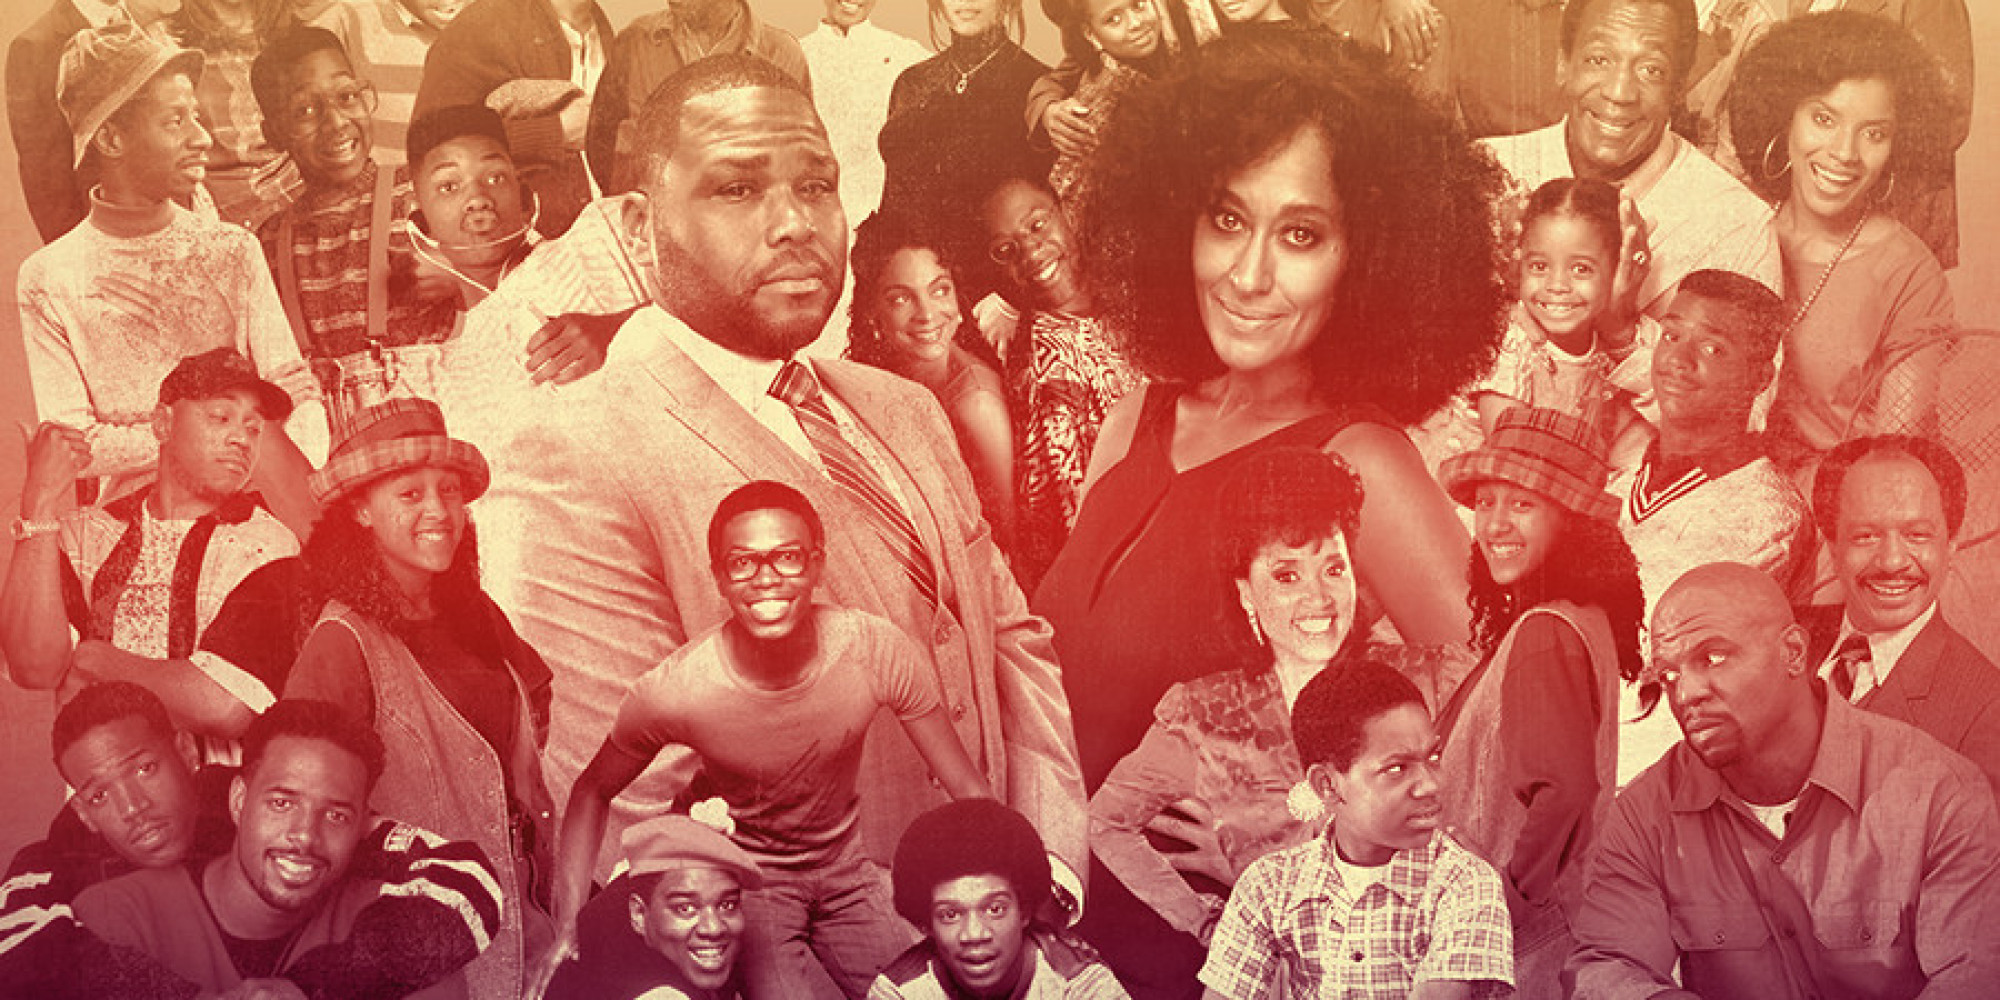 How To Make It As A Black Sitcom Be Careful How You Talk About Race